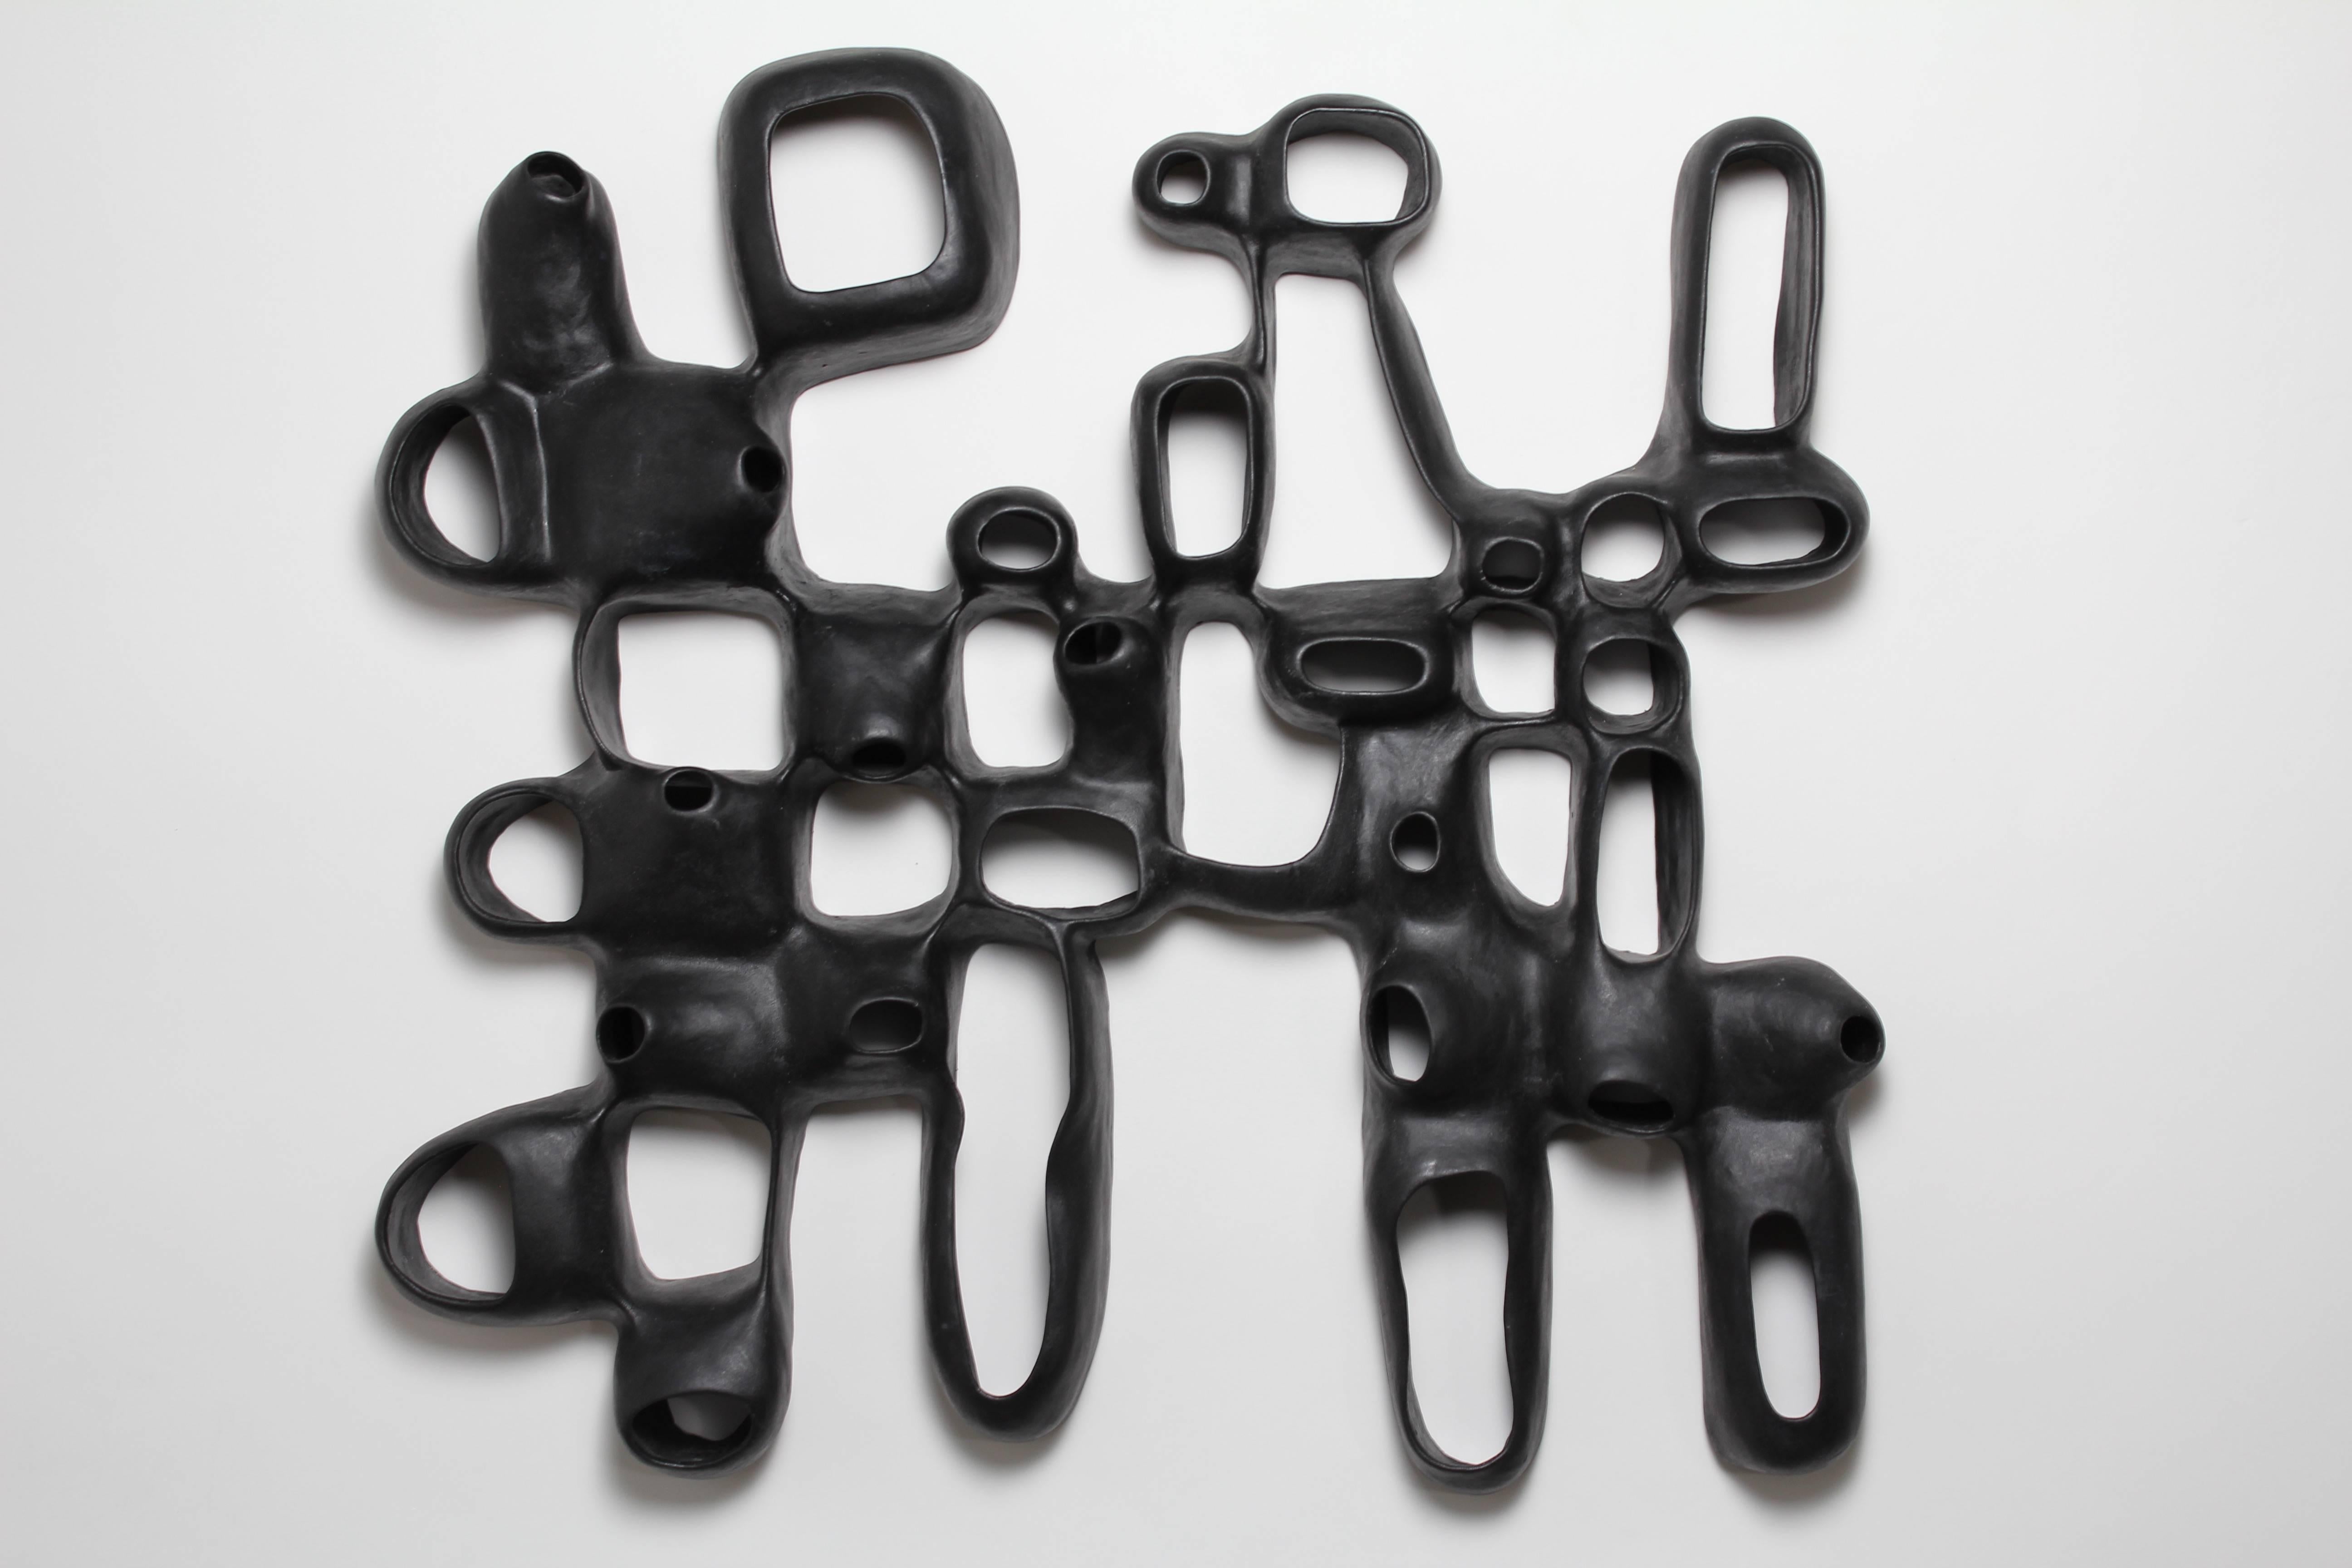 Joan Lurie Abstract Sculpture - Untitled Wall #2 - black porcelain geometric wall hanging sculpture